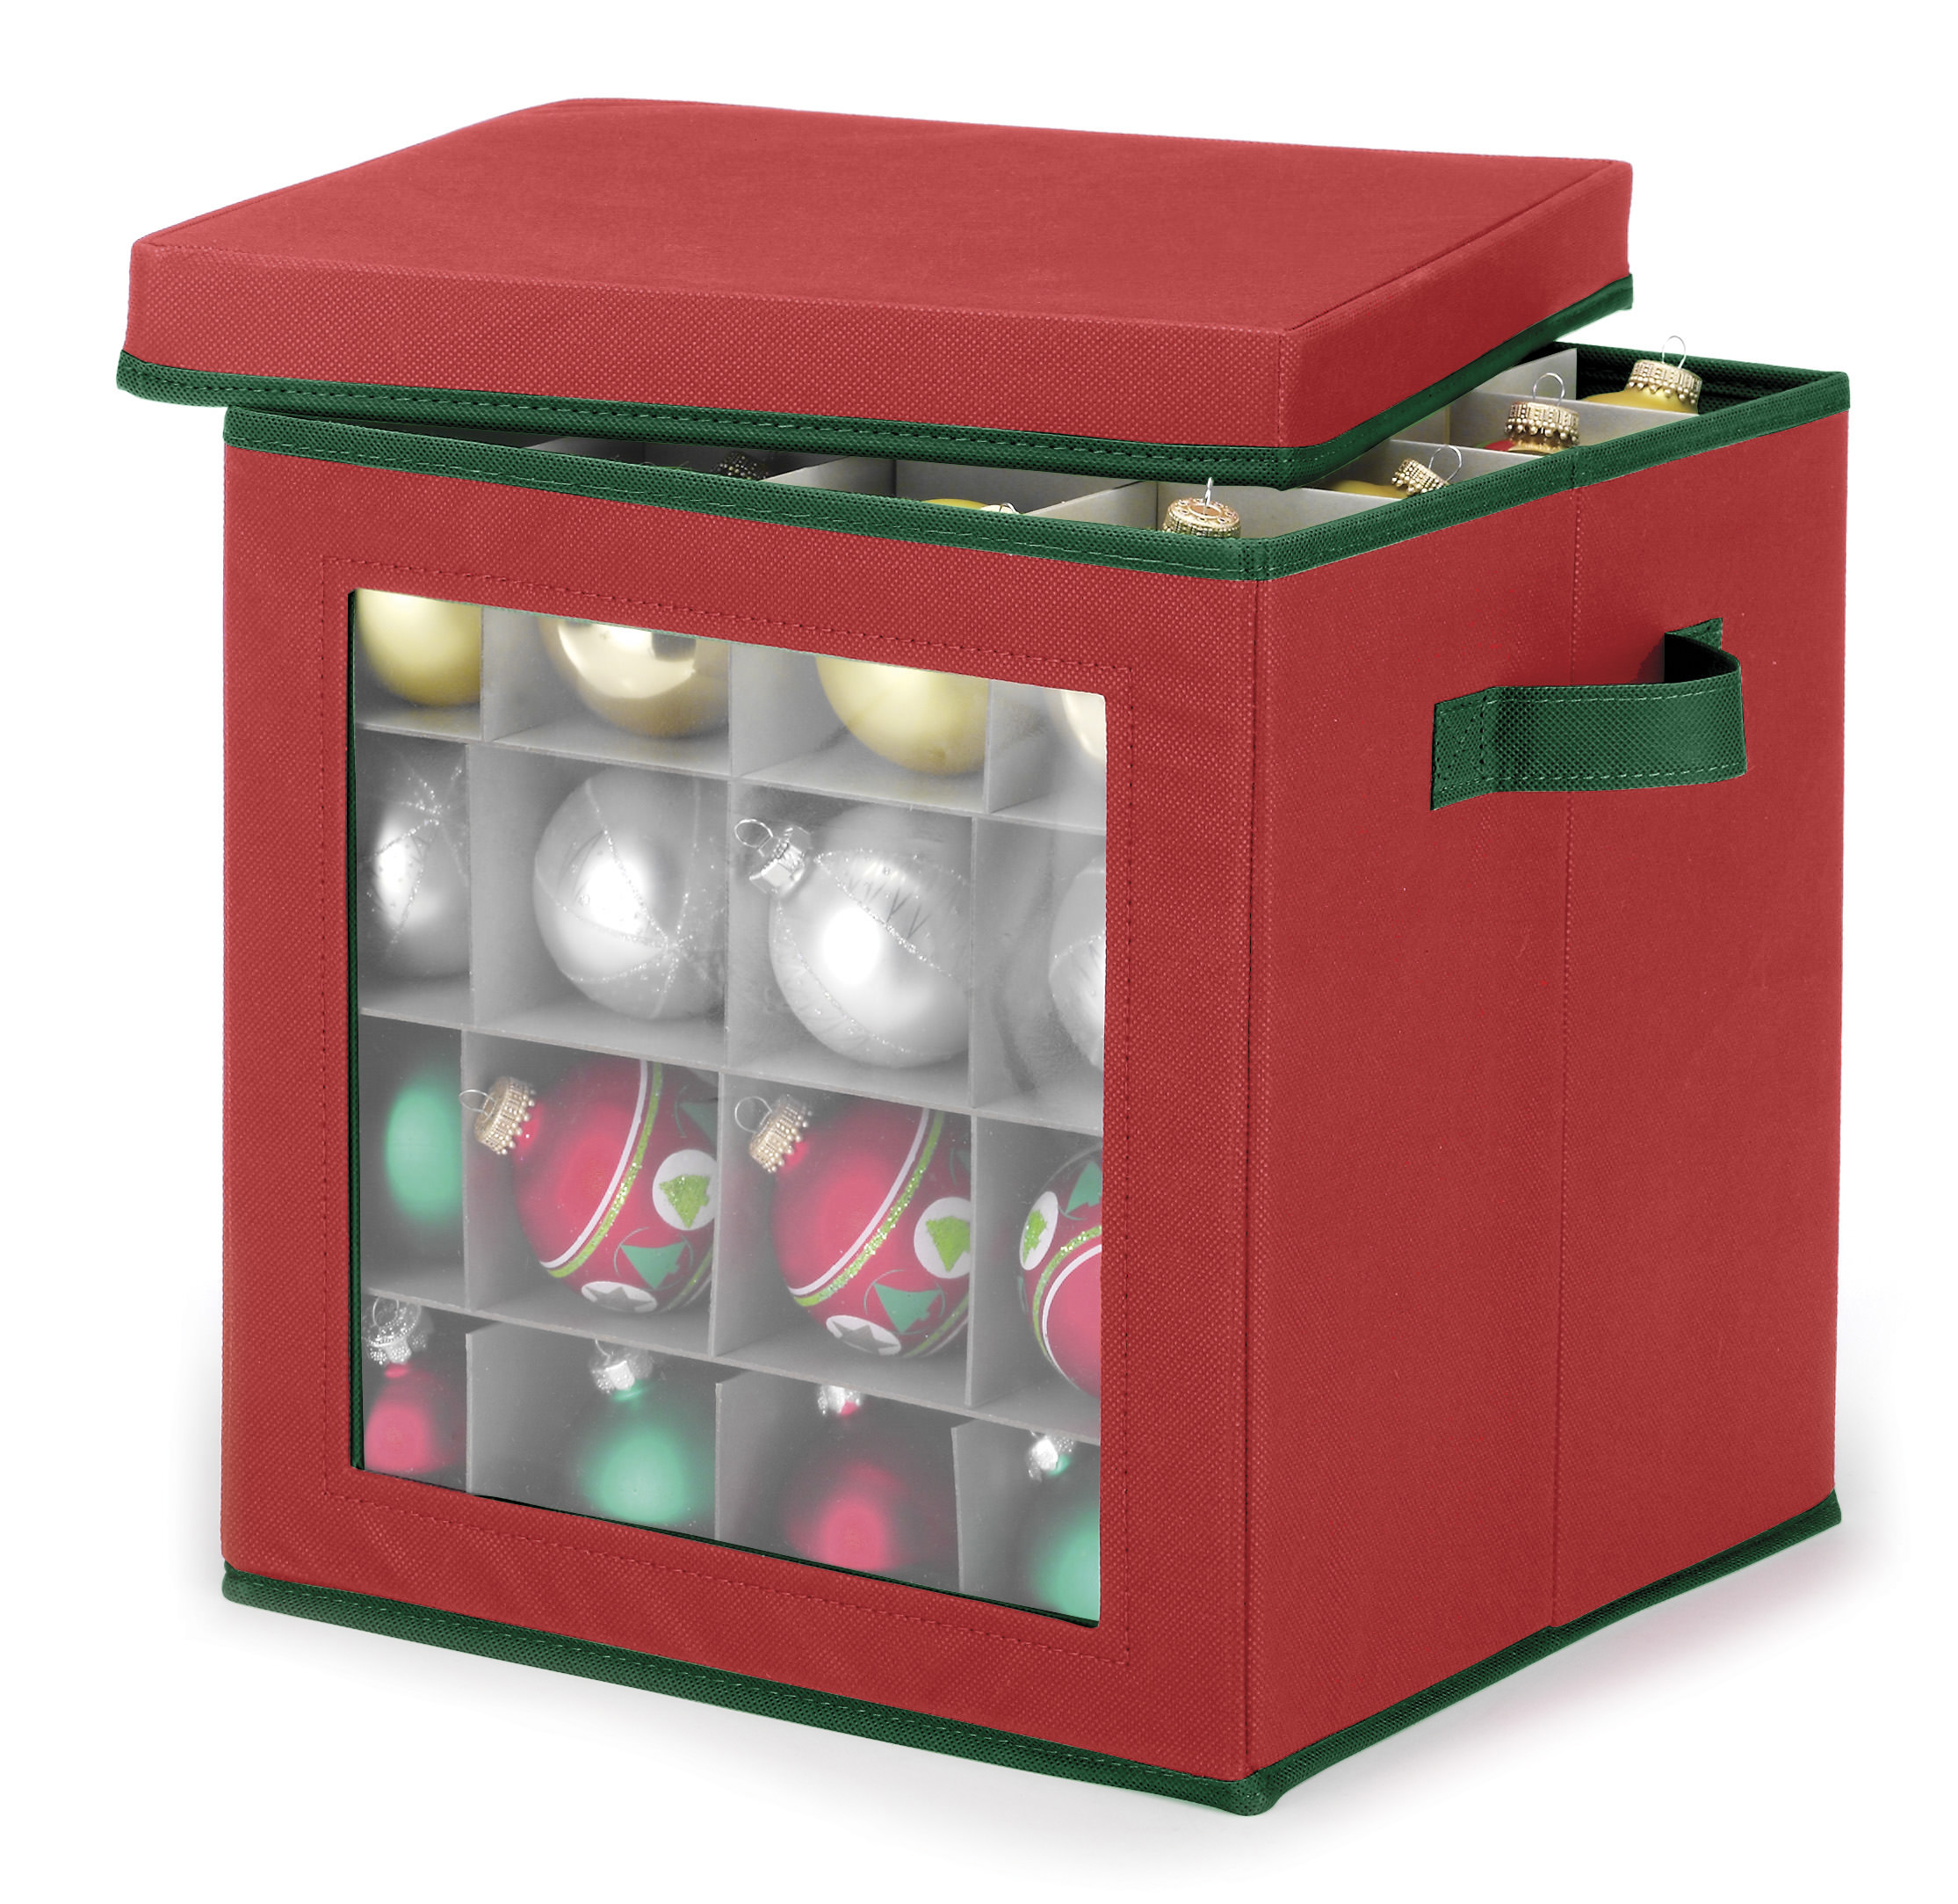 Whitmor Ornament Storage Cube - 64 Compartments - PPNW Red - 12" x 12" x 12" for Adult Use - image 1 of 7